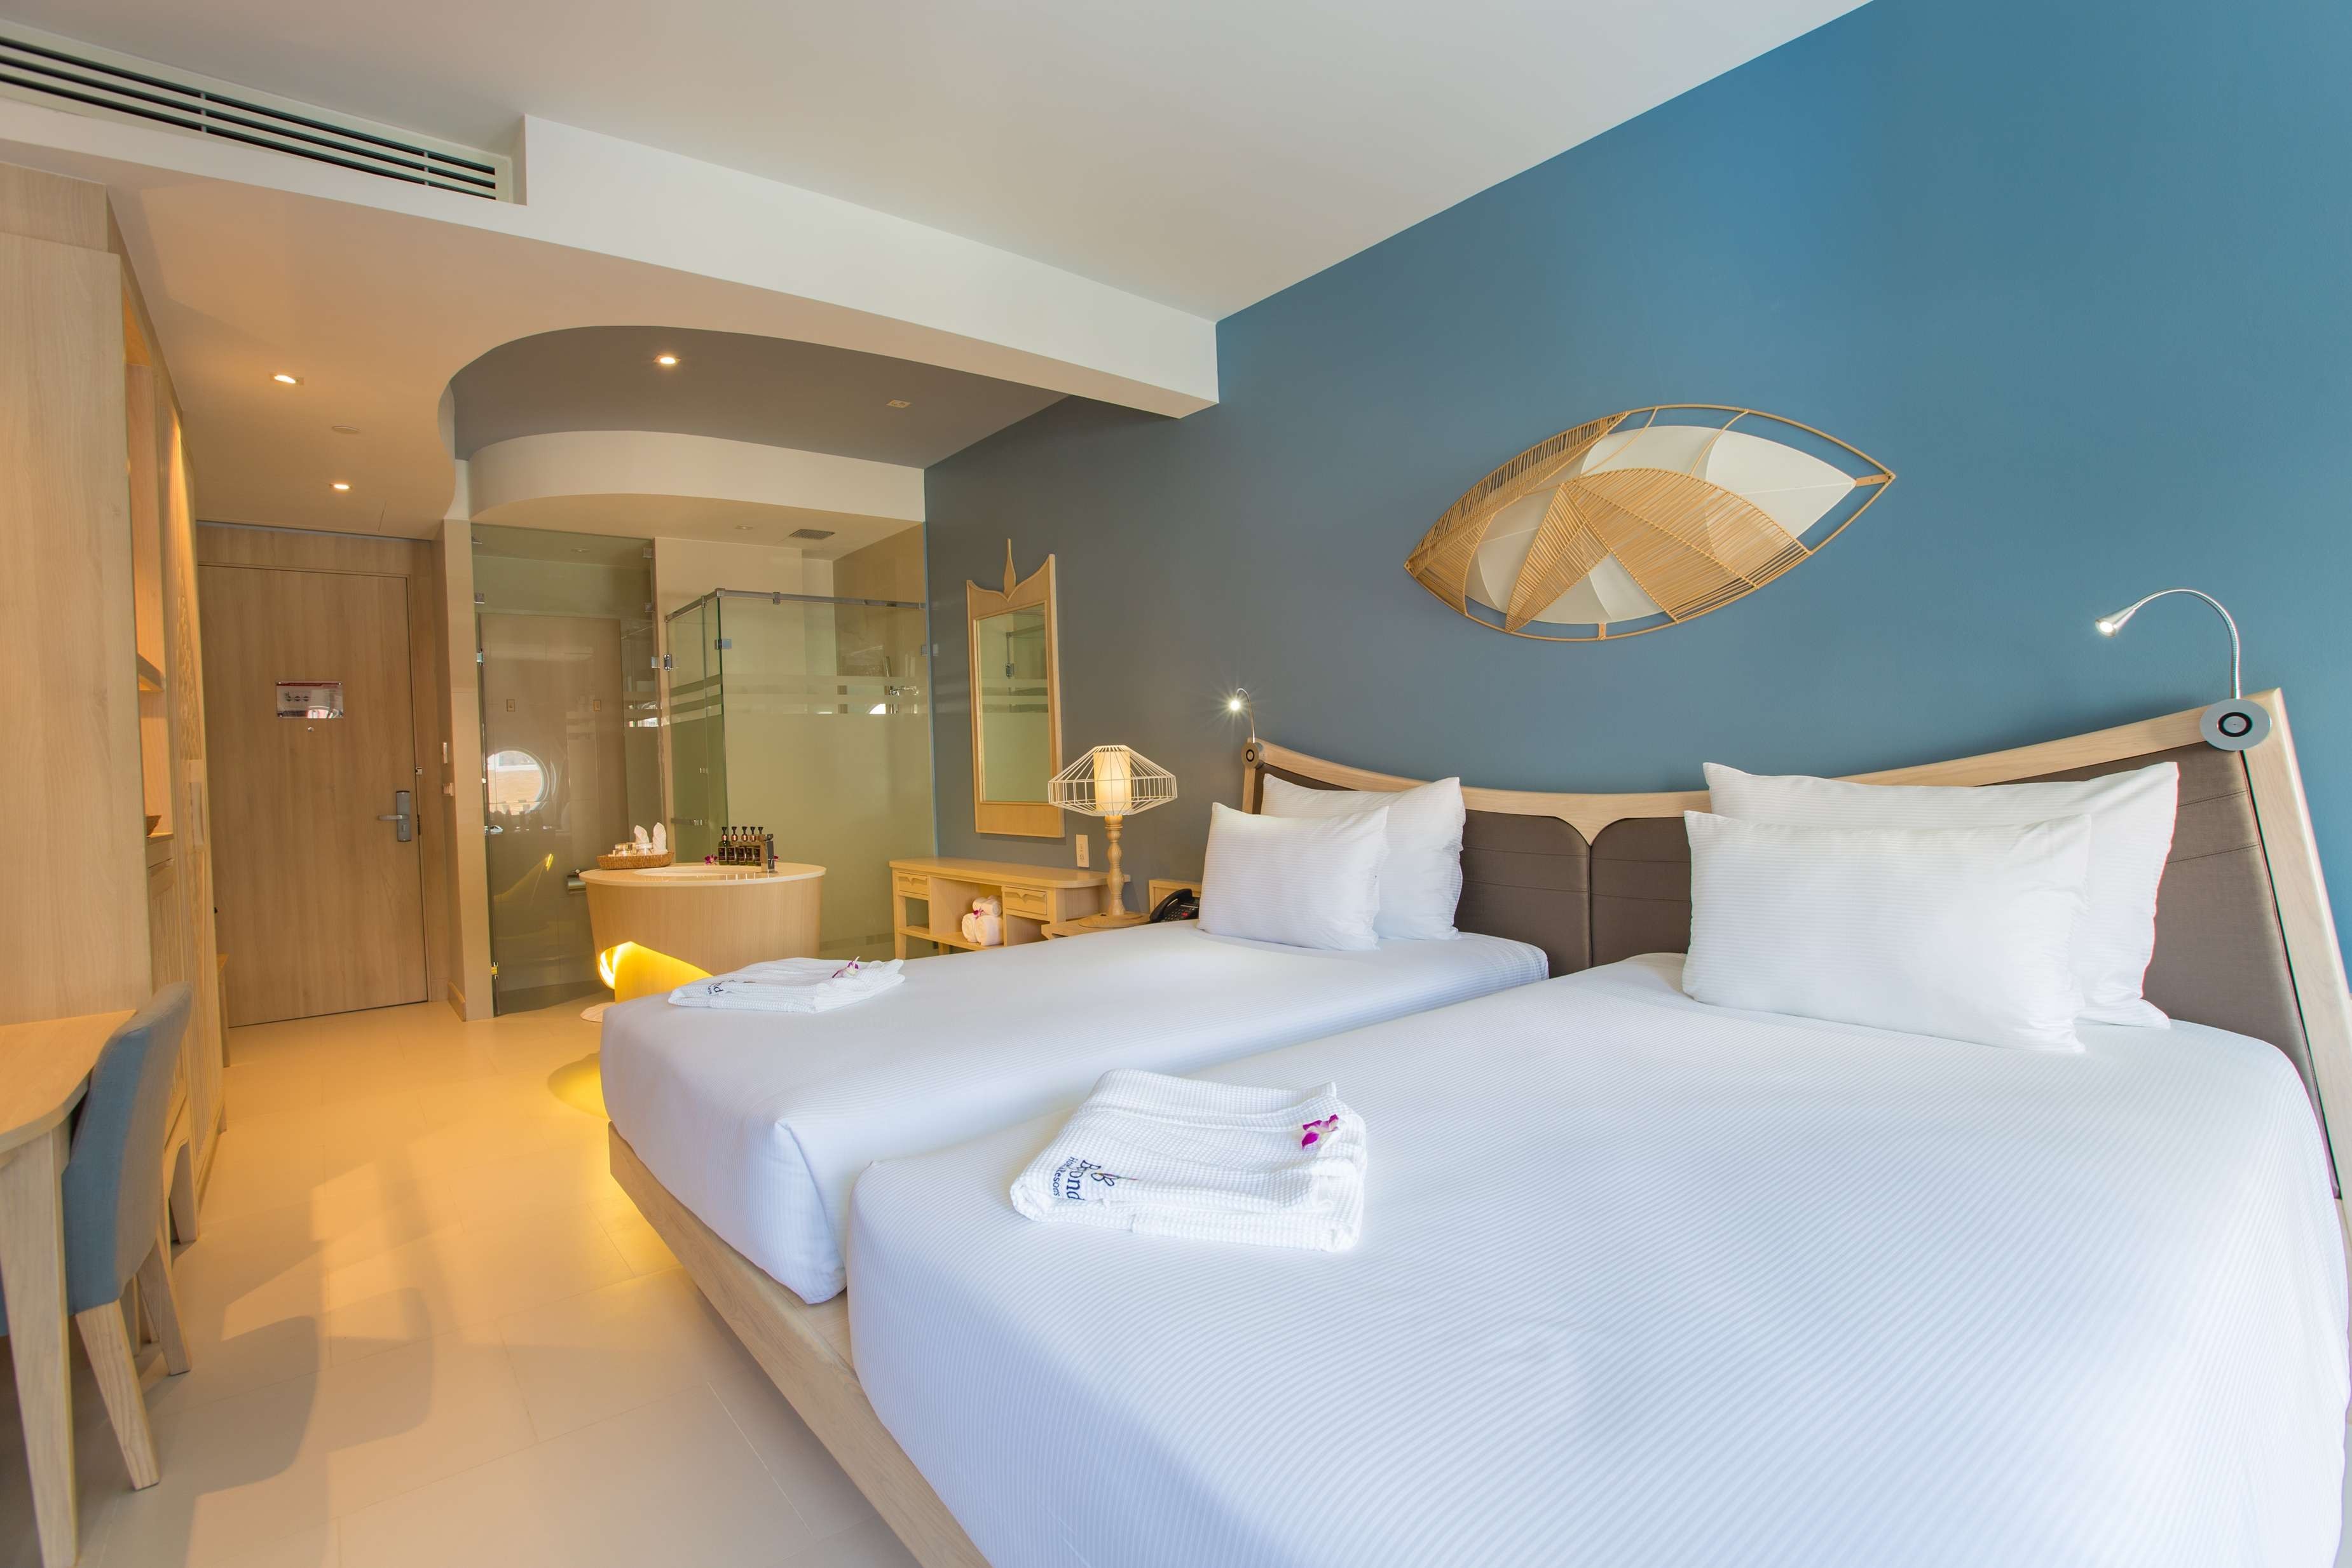 Deluxe, Beyond Hotel Patong 4*